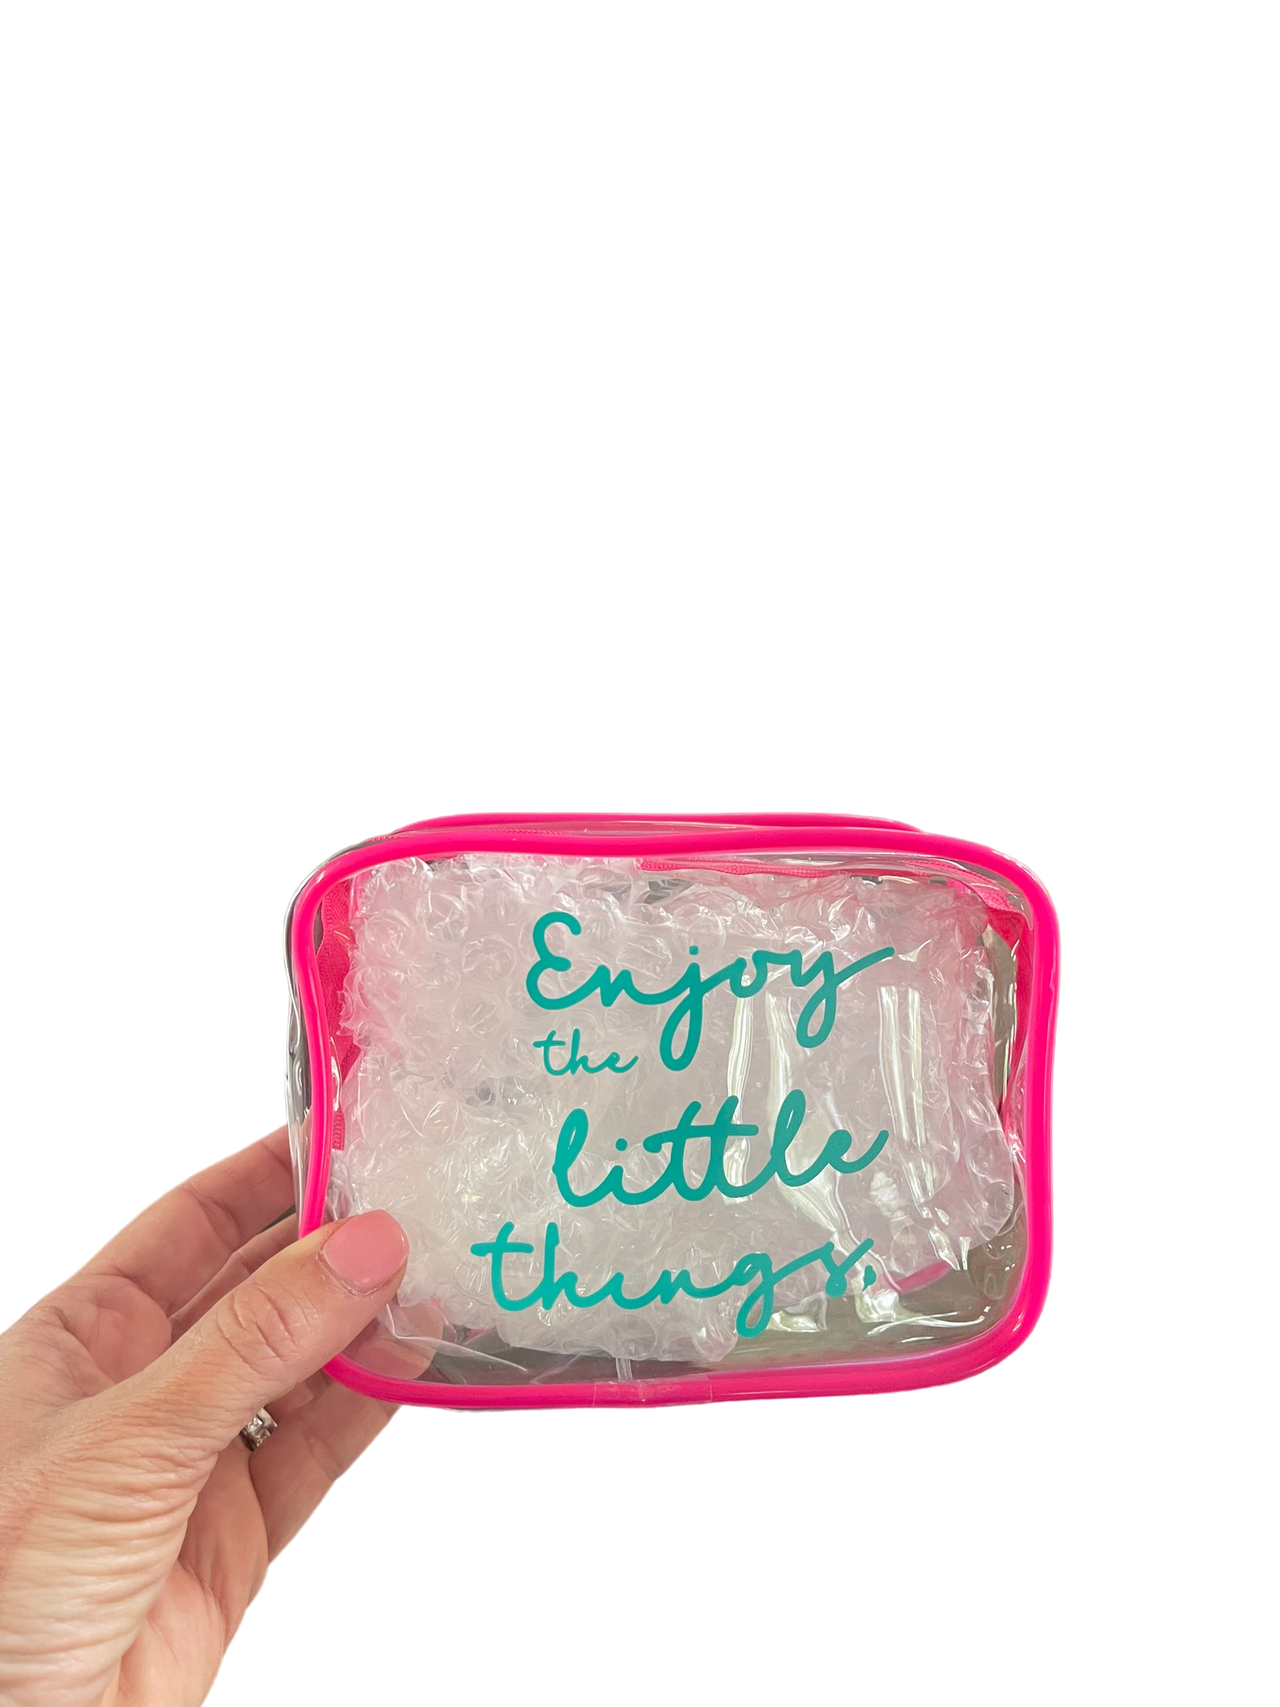 Enjoy the little things mini clear cosmetic bag